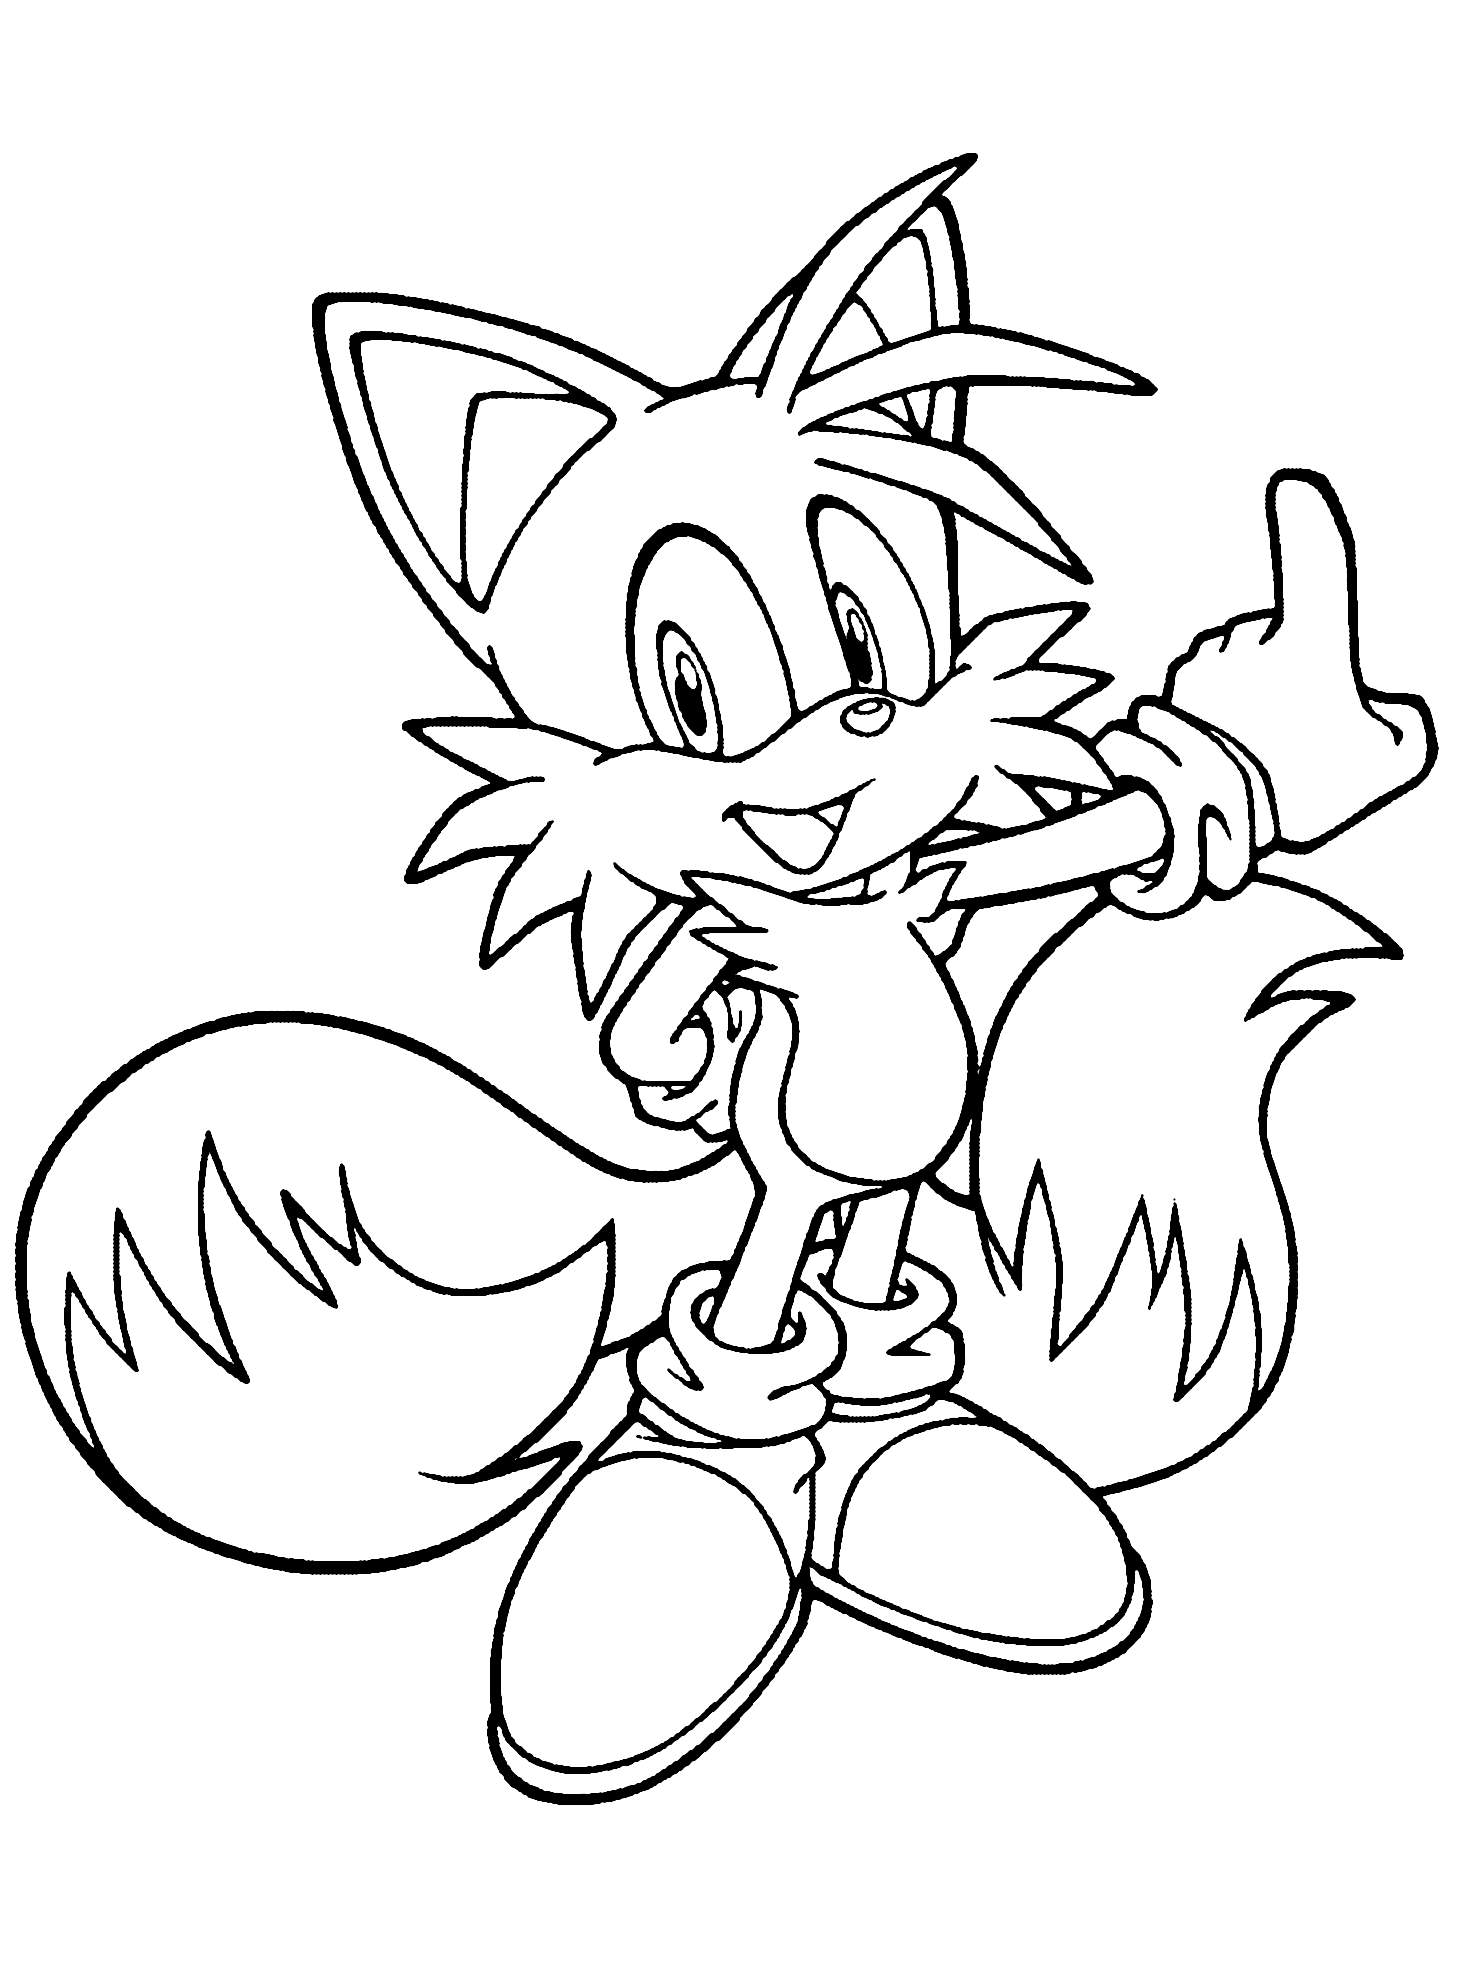 Tails Sonic coloring page free printable coloring pages on